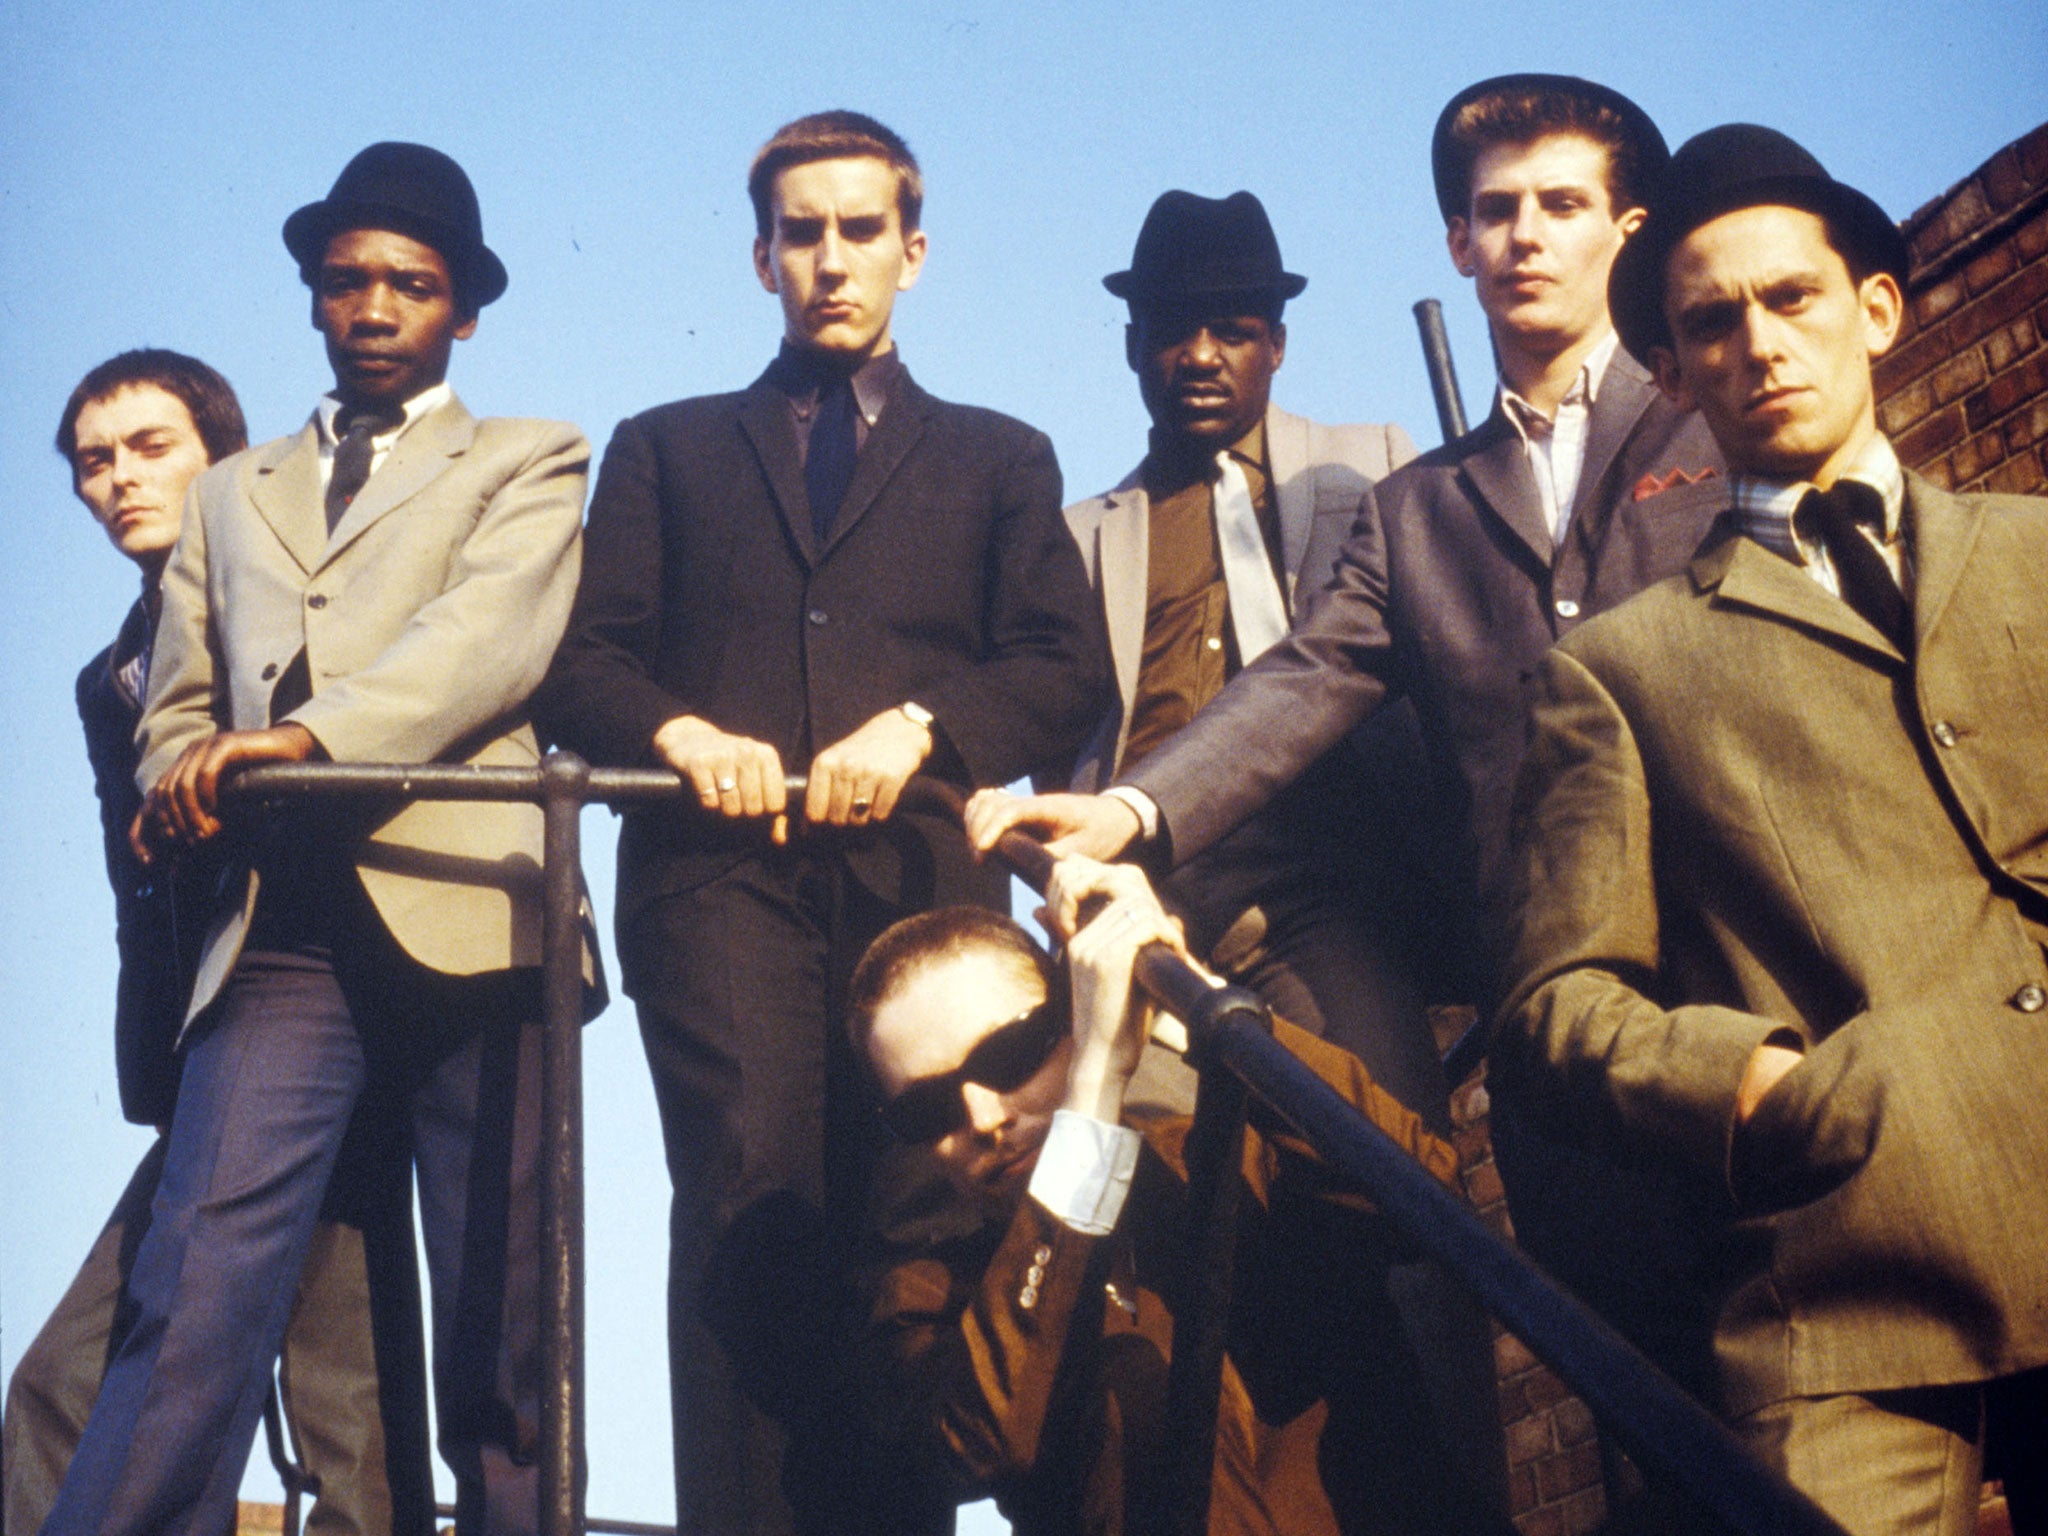 The classic Specials line-up, left to right: Bradbury, Lynval Golding, Terry Hall, Neville Staple, Roddy Radiation, Horace Panter and, in shades, Jerry Dammers